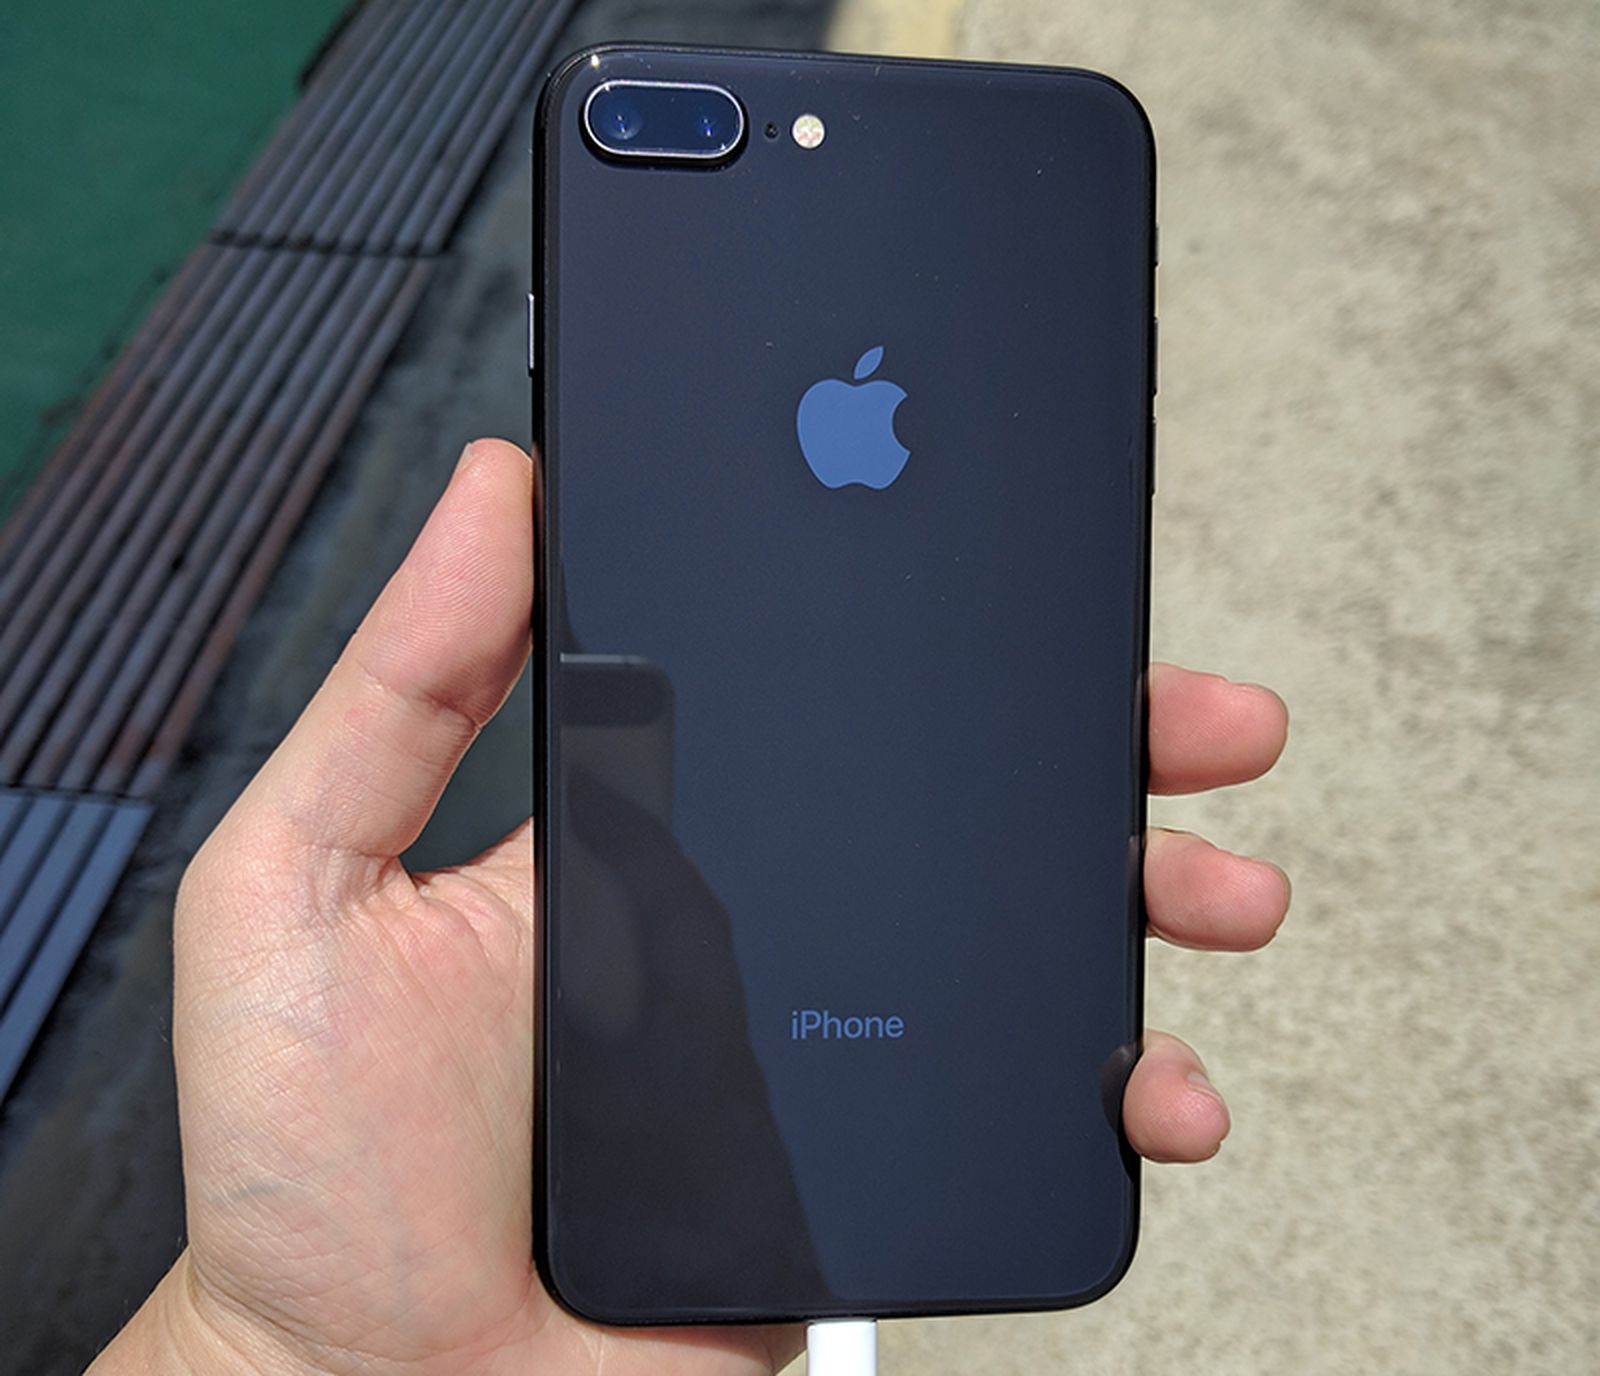 Conductividad Integrar Tratamiento Early Adopters of iPhone 8 Impressed With Glass-Backed Design and True Tone  Display - MacRumors